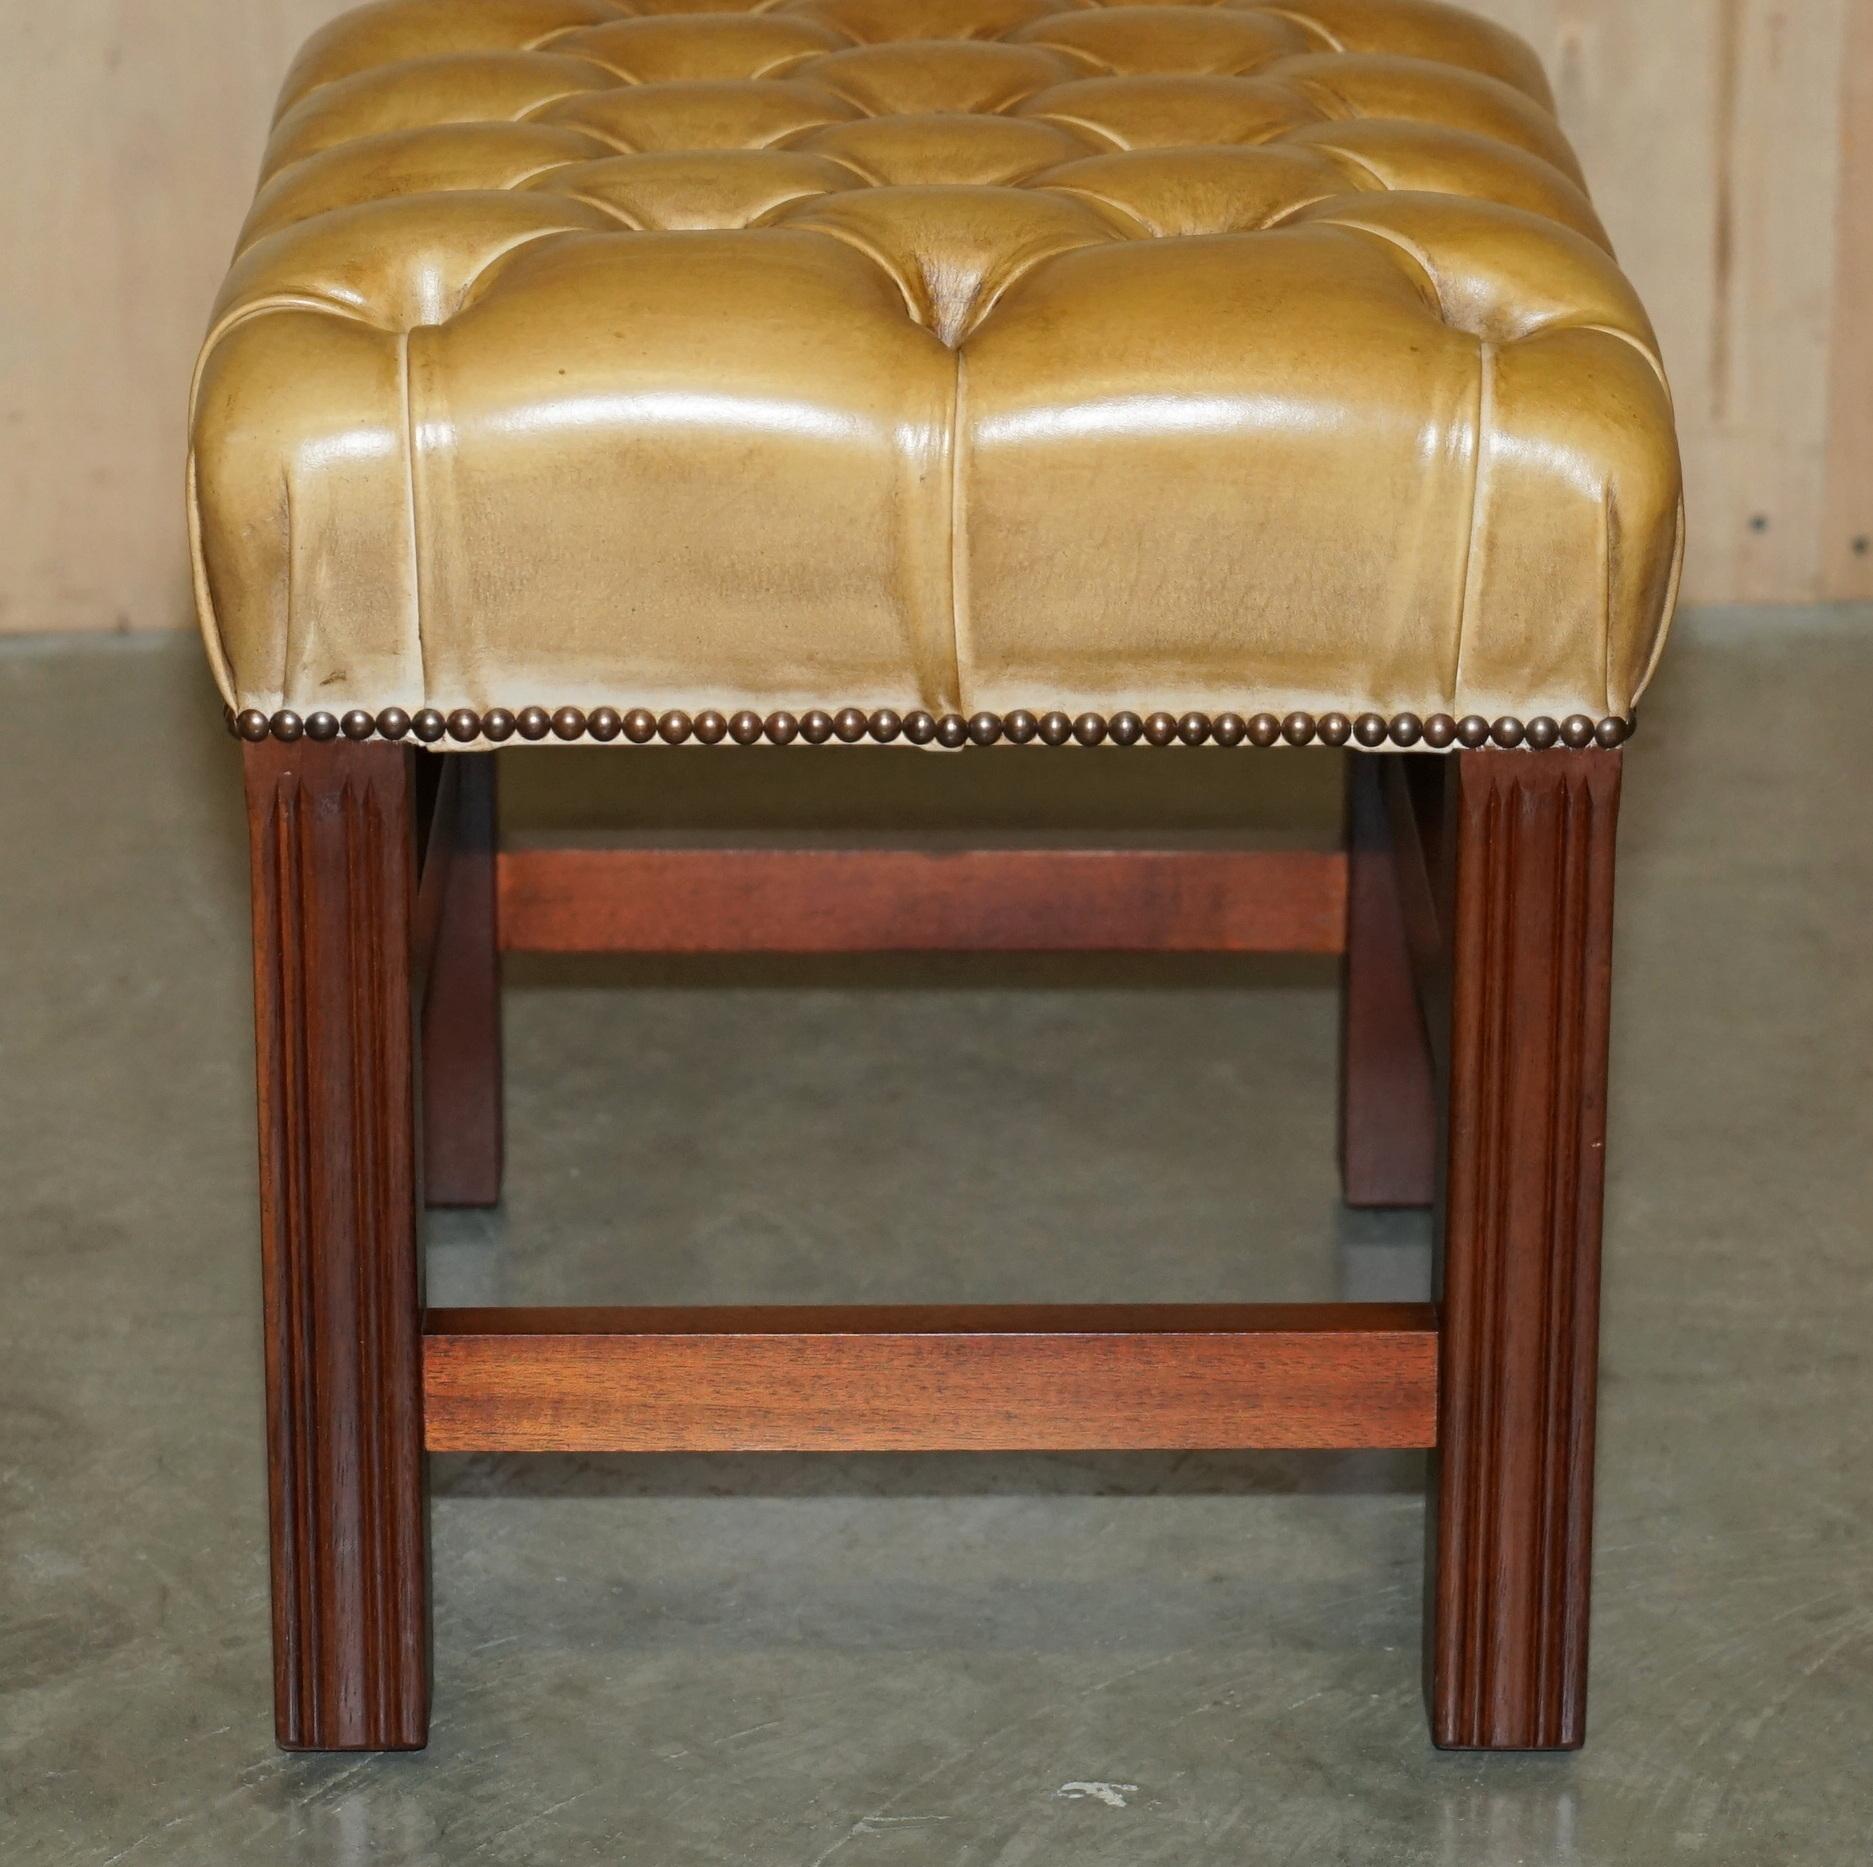 VINTAGE Tan BROWN LEATHER CHESTERFIELD TUFTED BARON FOOTSTOOL PART OF SUiTE (Leder) im Angebot